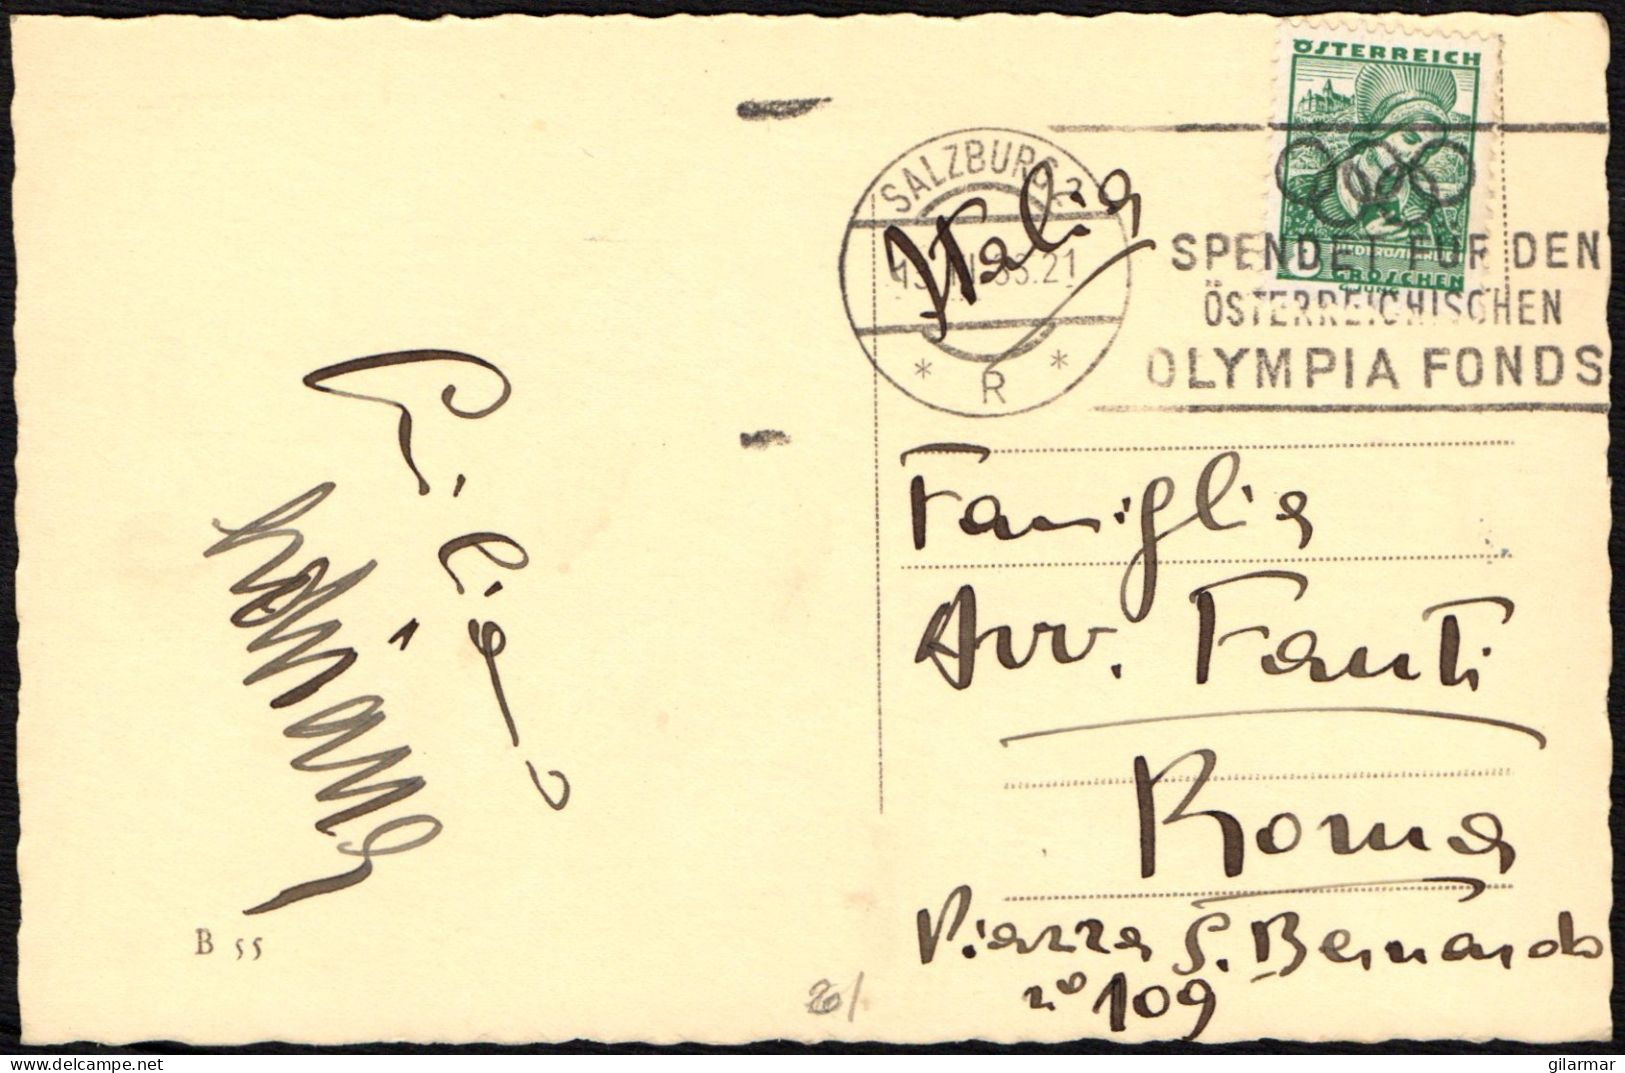 OLYMPIC GAMES 1936 - AUSTRIA SALZBURG 1935 - DONATE TO THE AUSTRIAN OLYMPIC FUND - MAILED POSTCARD - M - Ete 1936: Berlin